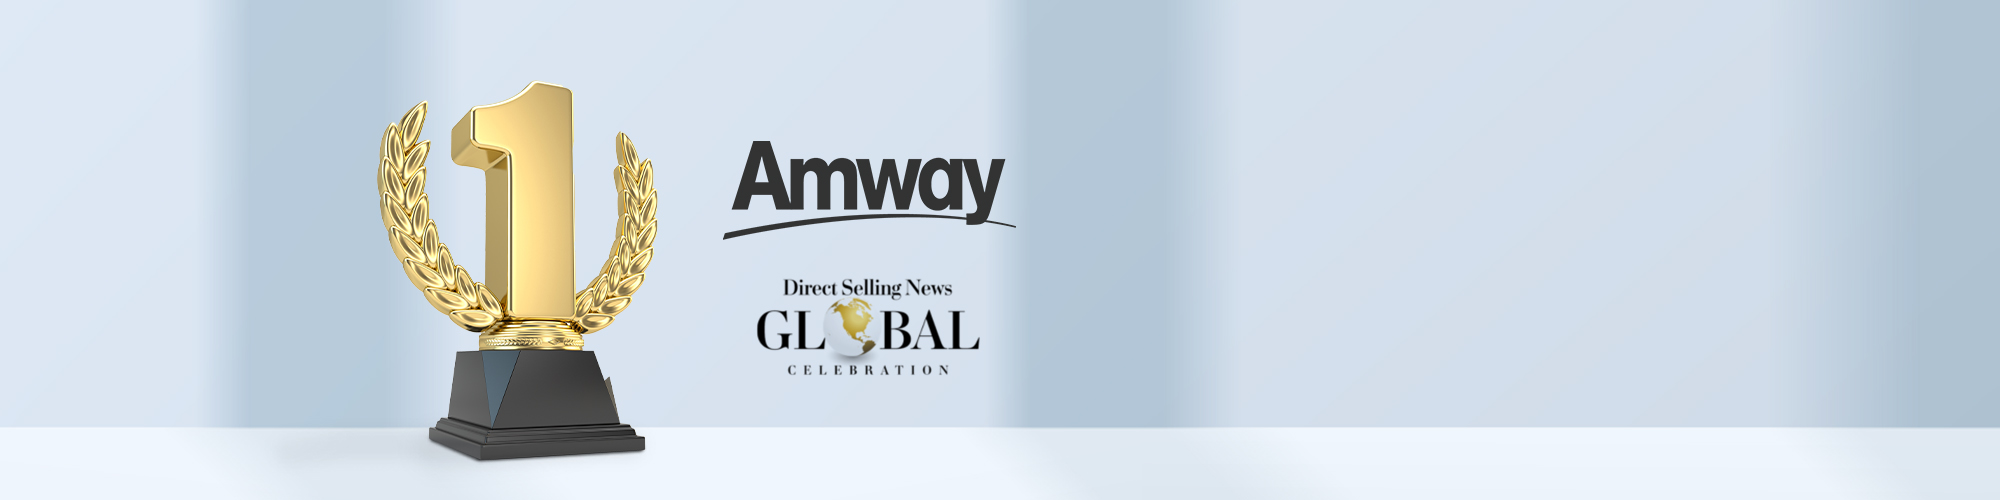 amway1-widescreen.png